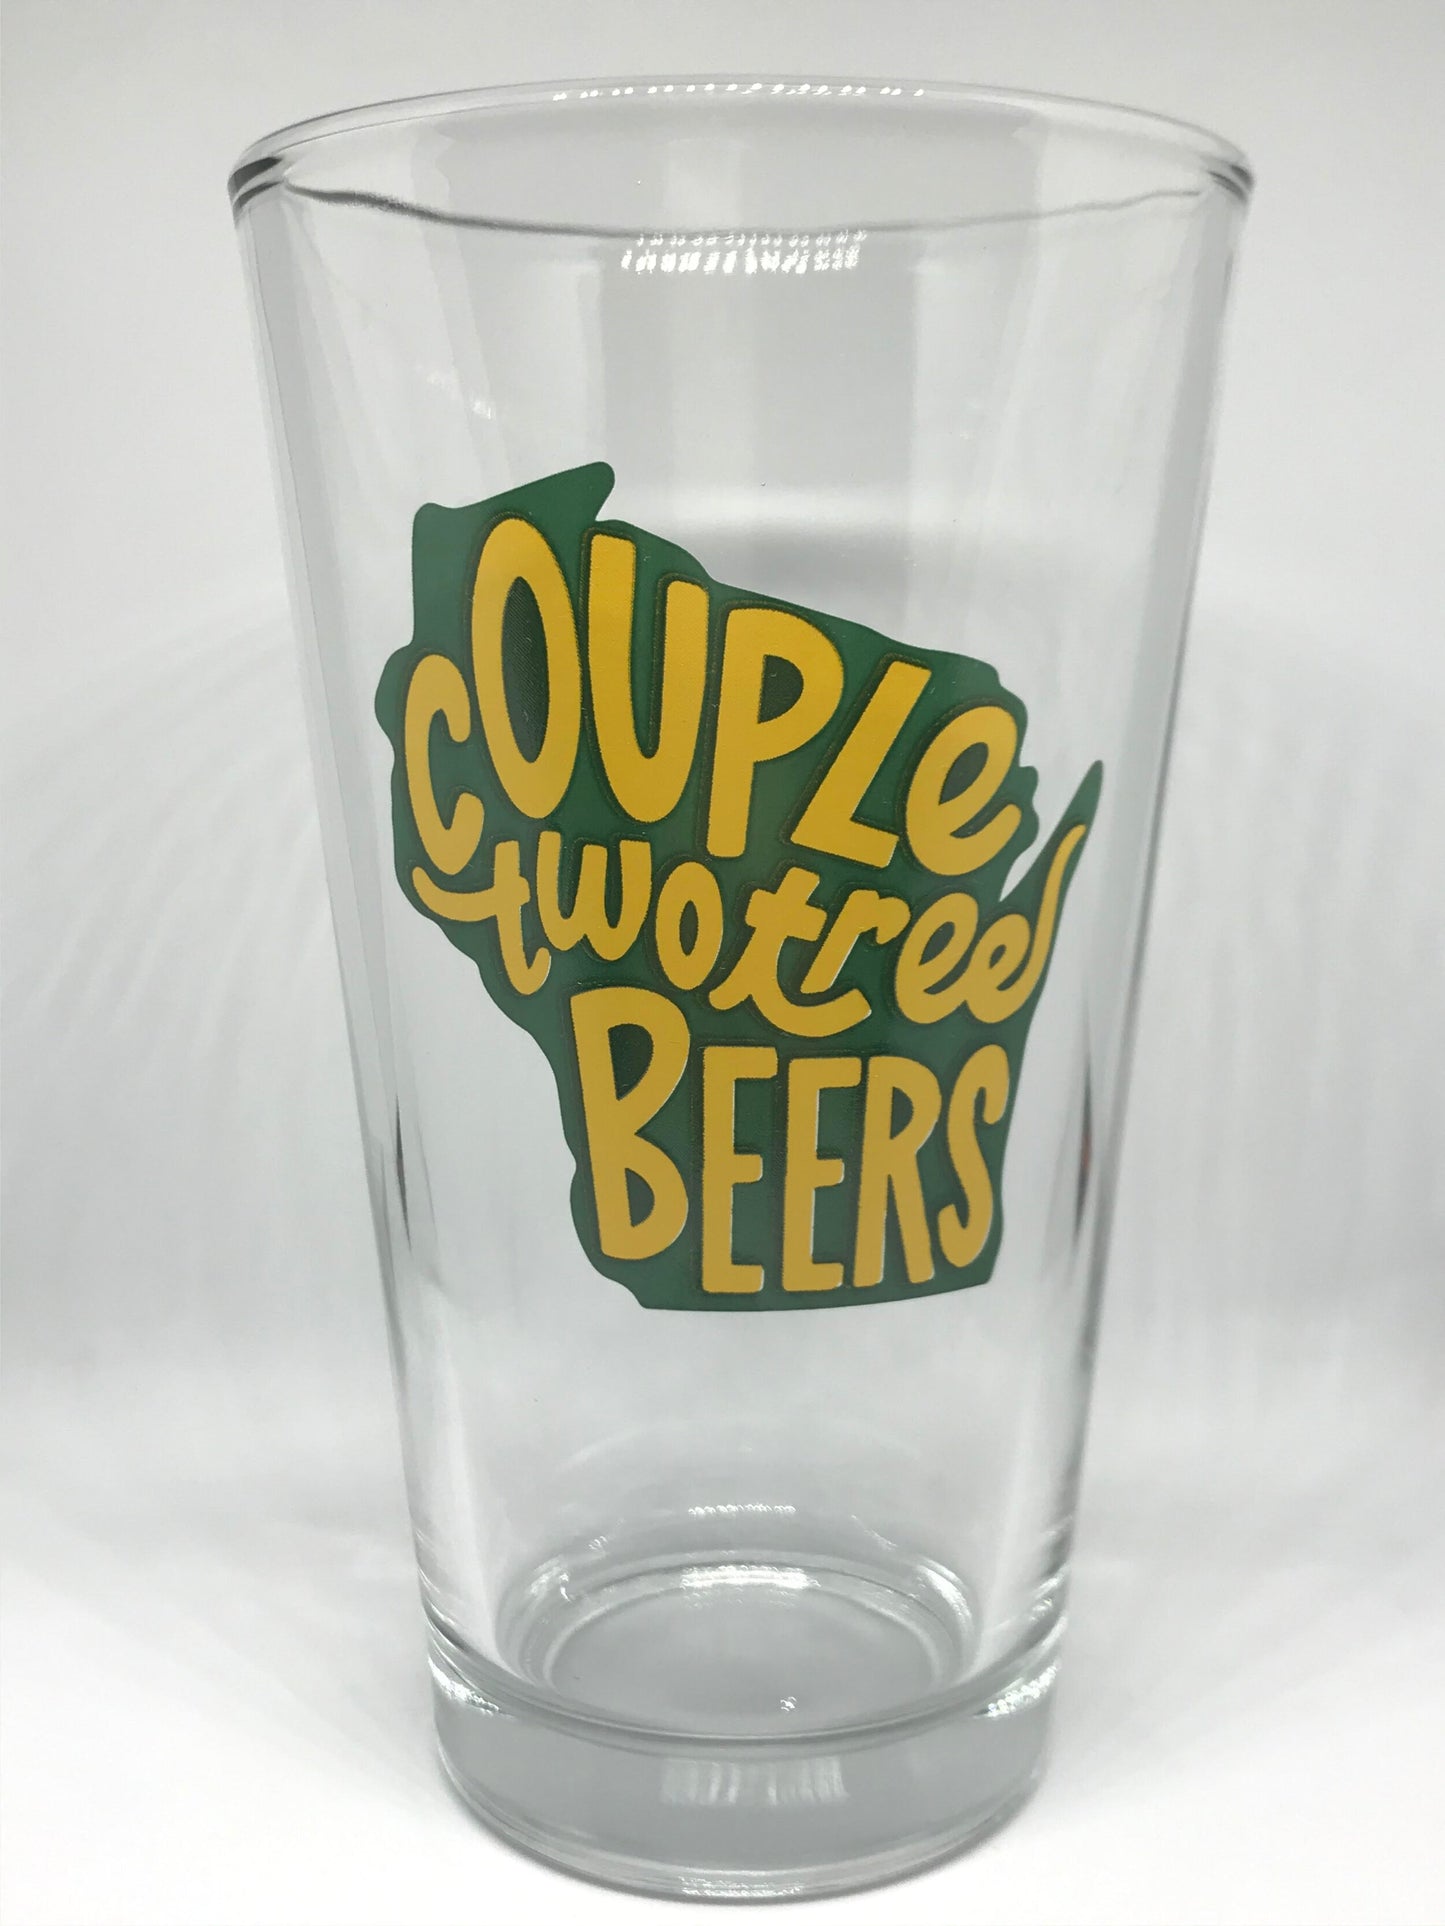 Couple Two Tree Beers Wisconsin Pint Glass